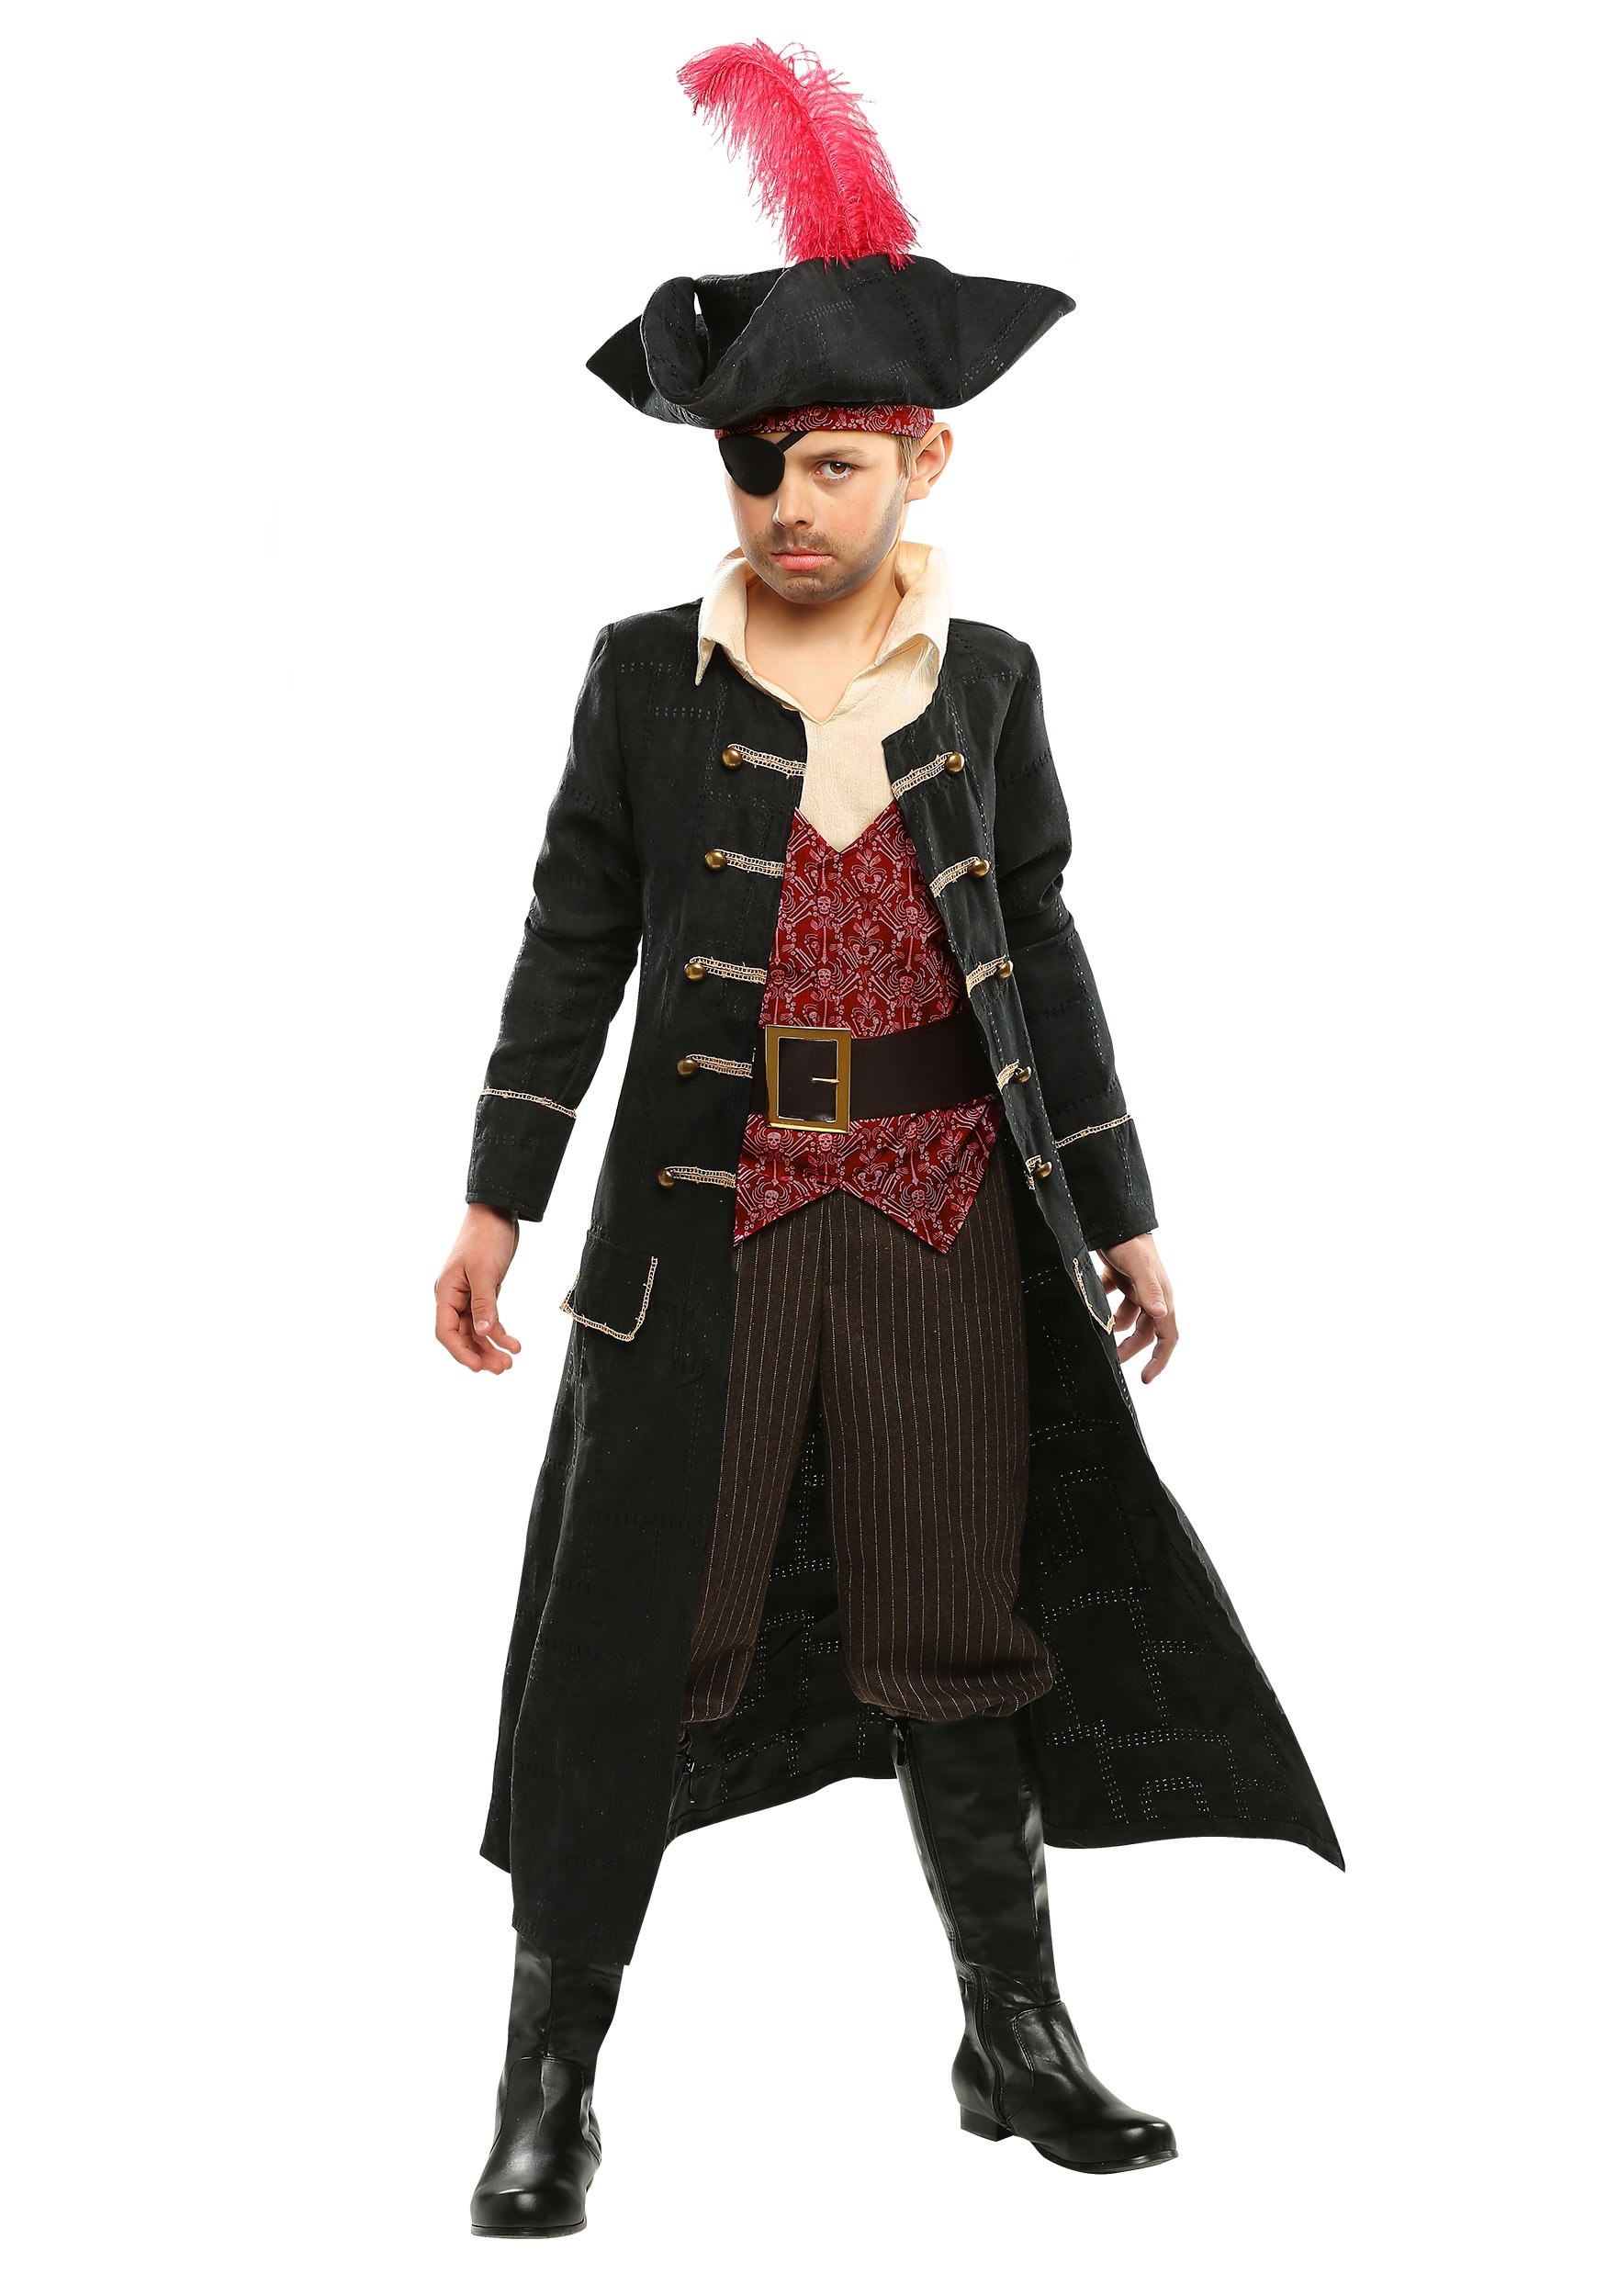 Photos - Fancy Dress SHIP FUN Costumes  Captain Costume for Boys Black/Red/Brown FUN6282 